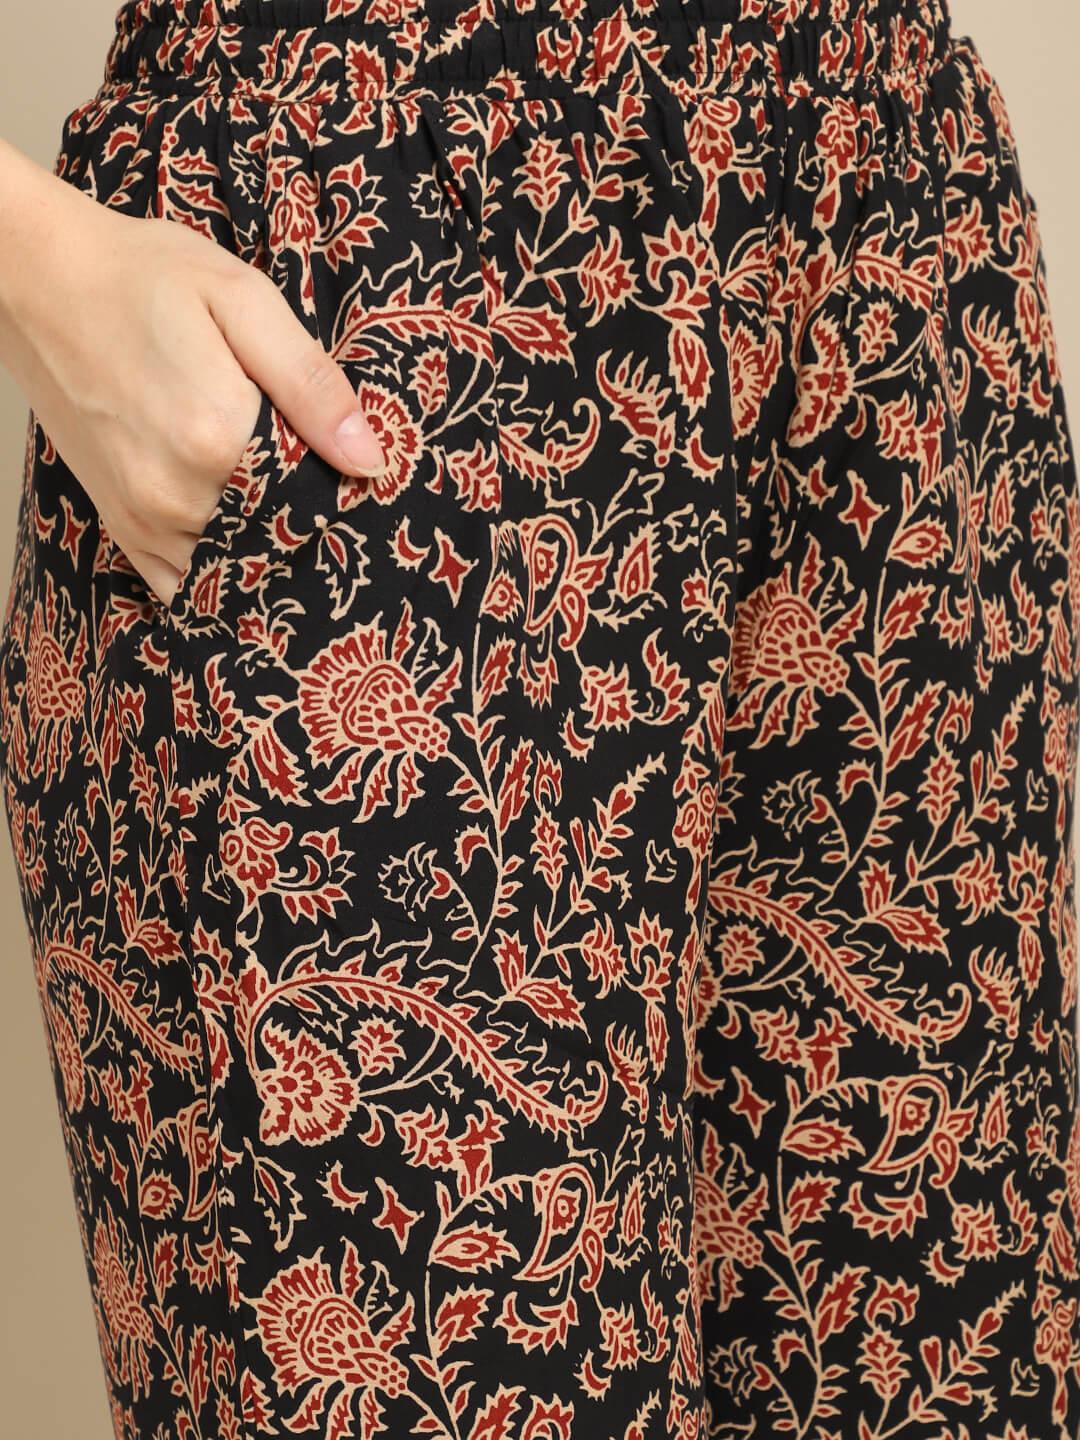 Black Color Abstract Printed Viscose Rayon Ethnic Nightsuit Claura Designs Pvt. Ltd. Nightsuit Abstract, Black, Nightsuit, Rayon, Short Sleeves, Sleepwear